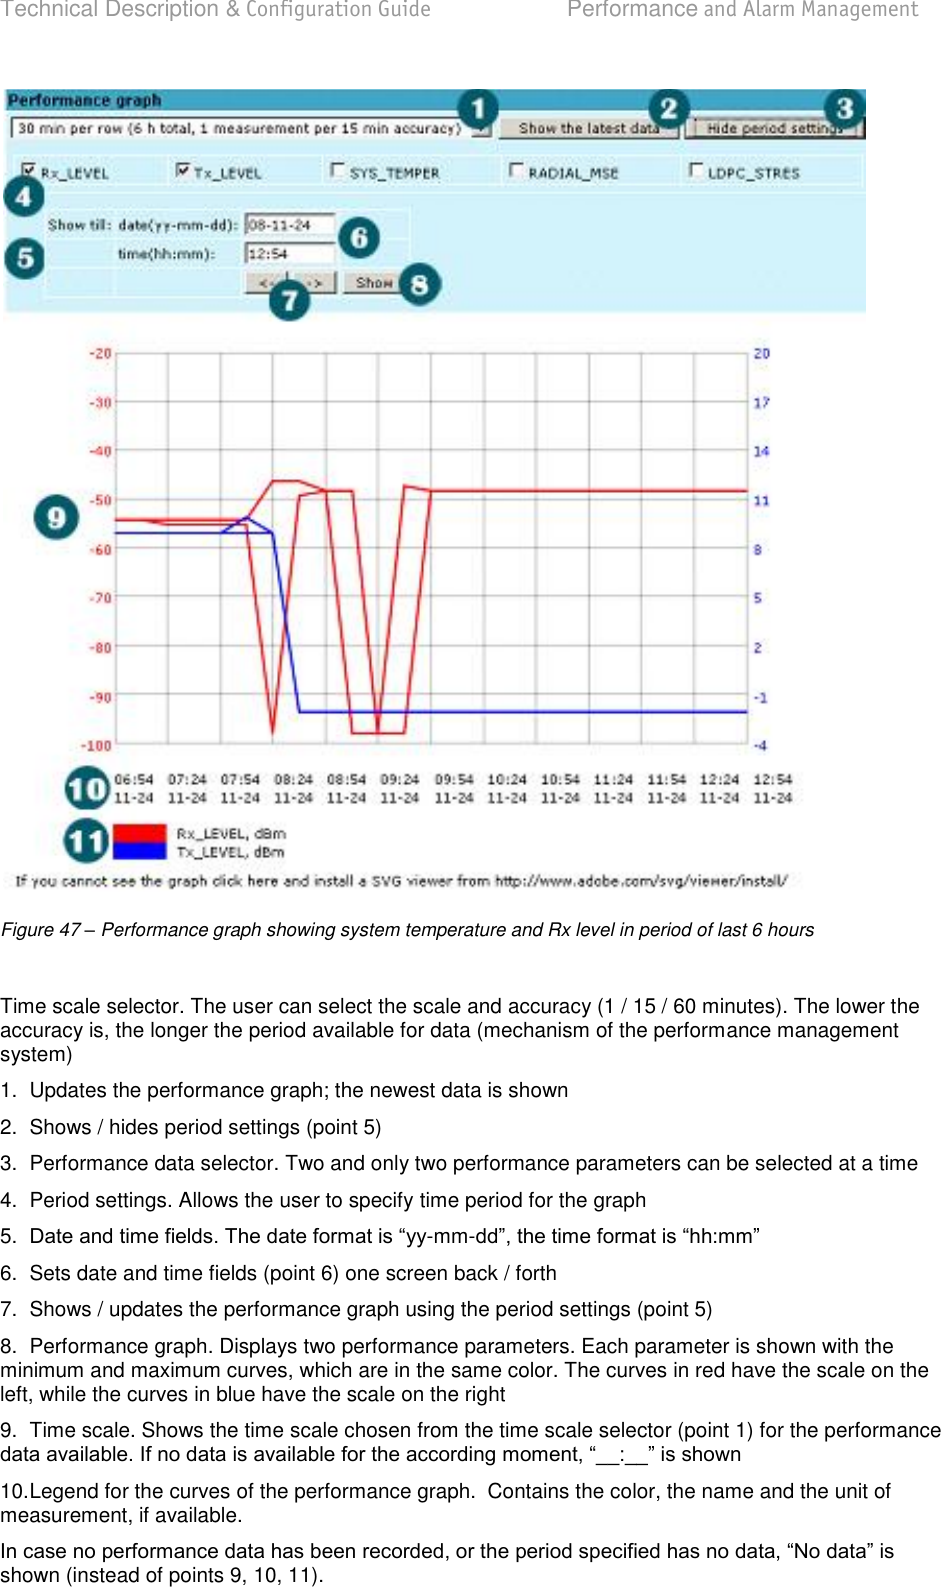 Technical Description &amp; Configuration Guide  Performance and Alarm Management  LigoWave  Page 68  Figure 47 – Performance graph showing system temperature and Rx level in period of last 6 hours  Time scale selector. The user can select the scale and accuracy (1 / 15 / 60 minutes). The lower the accuracy is, the longer the period available for data (mechanism of the performance management system) 1.  Updates the performance graph; the newest data is shown 2.  Shows / hides period settings (point 5) 3.  Performance data selector. Two and only two performance parameters can be selected at a time 4.  Period settings. Allows the user to specify time period for the graph 5. -mm- 6.  Sets date and time fields (point 6) one screen back / forth 7.  Shows / updates the performance graph using the period settings (point 5) 8.  Performance graph. Displays two performance parameters. Each parameter is shown with the minimum and maximum curves, which are in the same color. The curves in red have the scale on the left, while the curves in blue have the scale on the right 9.  Time scale. Shows the time scale chosen from the time scale selector (point 1) for the performance  10. Legend for the curves of the performance graph.  Contains the color, the name and the unit of measurement, if available. shown (instead of points 9, 10, 11).  